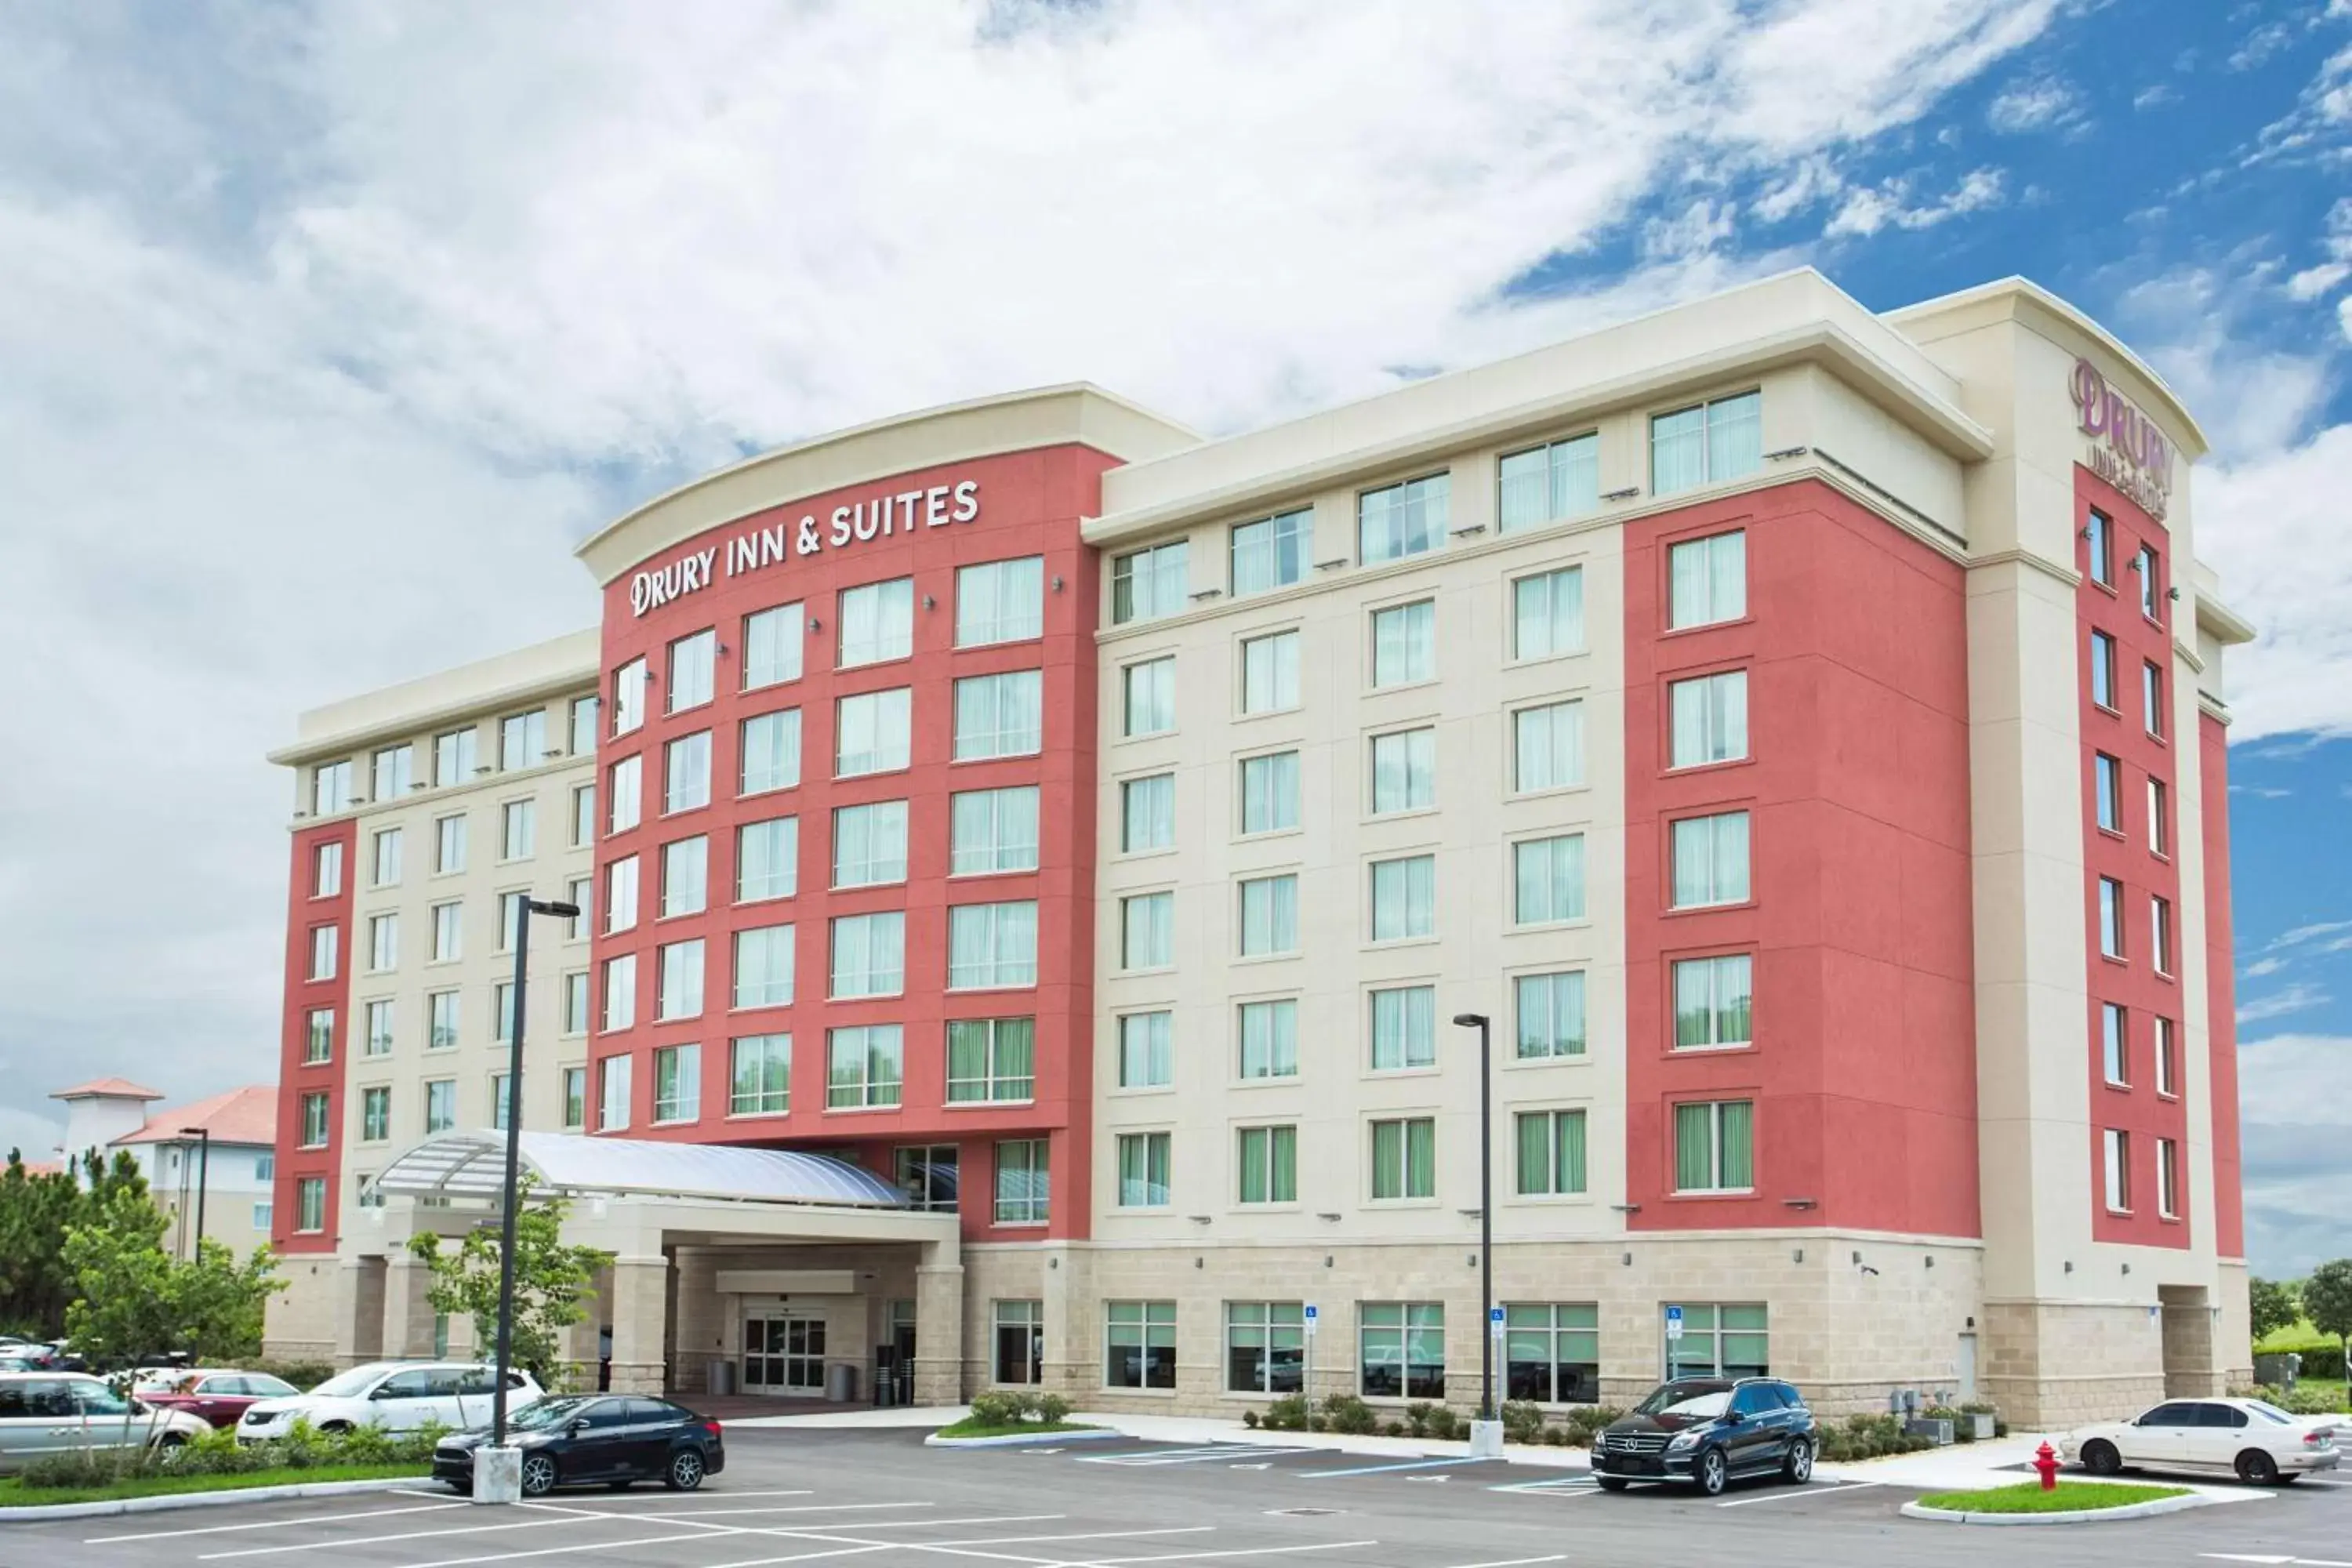 Property Building in Drury Inn & Suites Fort Myers Airport FGCU